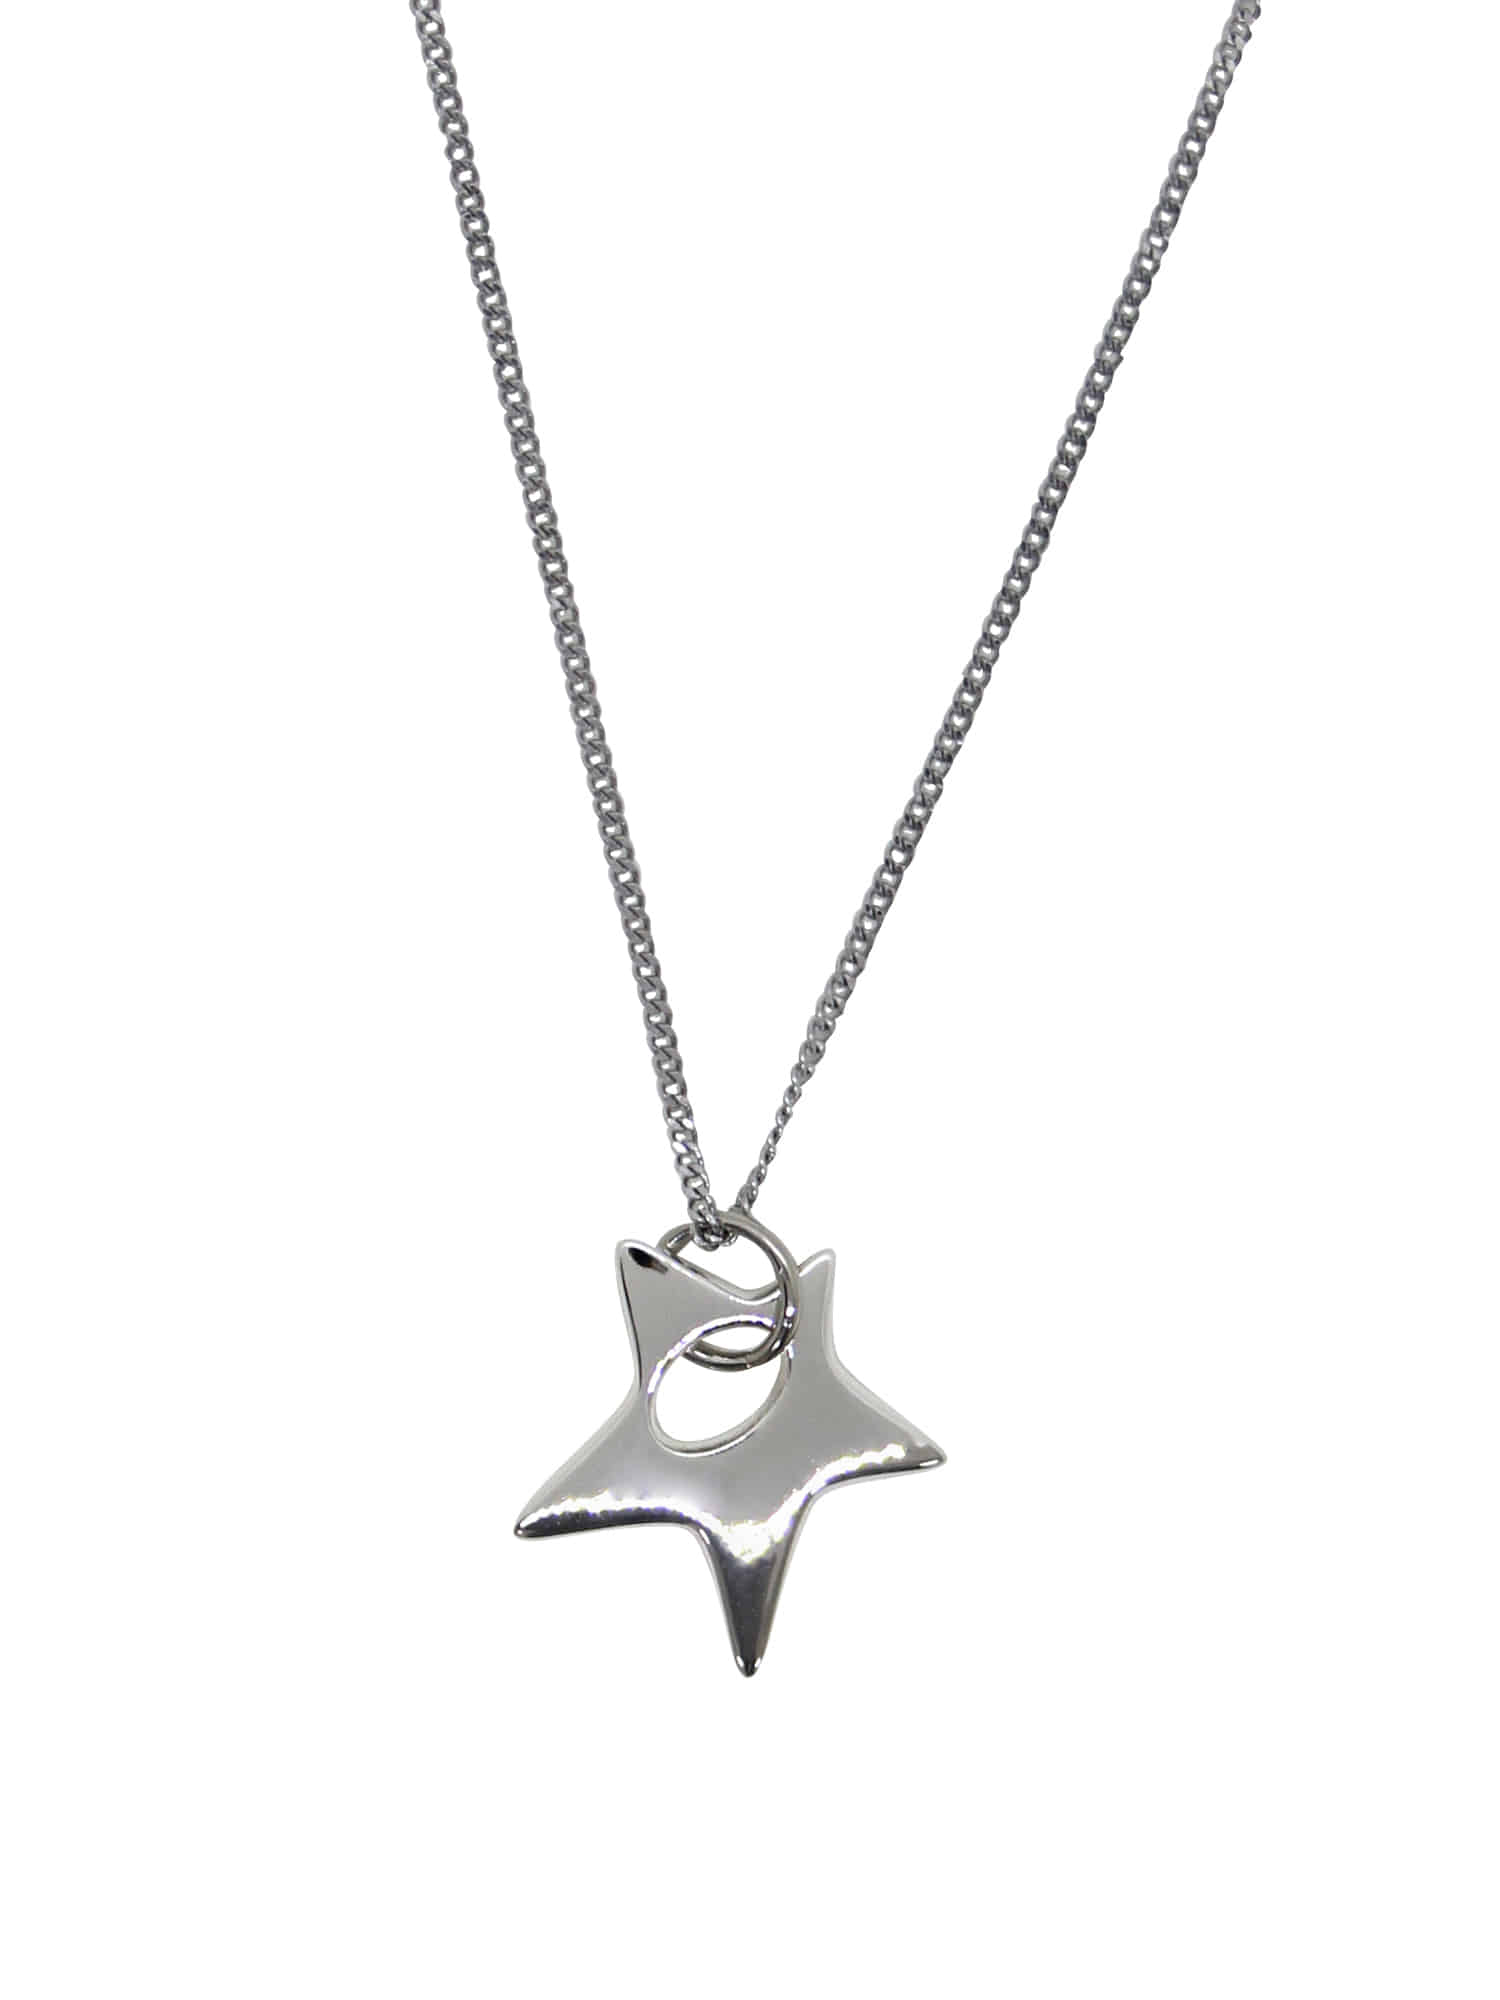 0:00 Star Silver Necklace